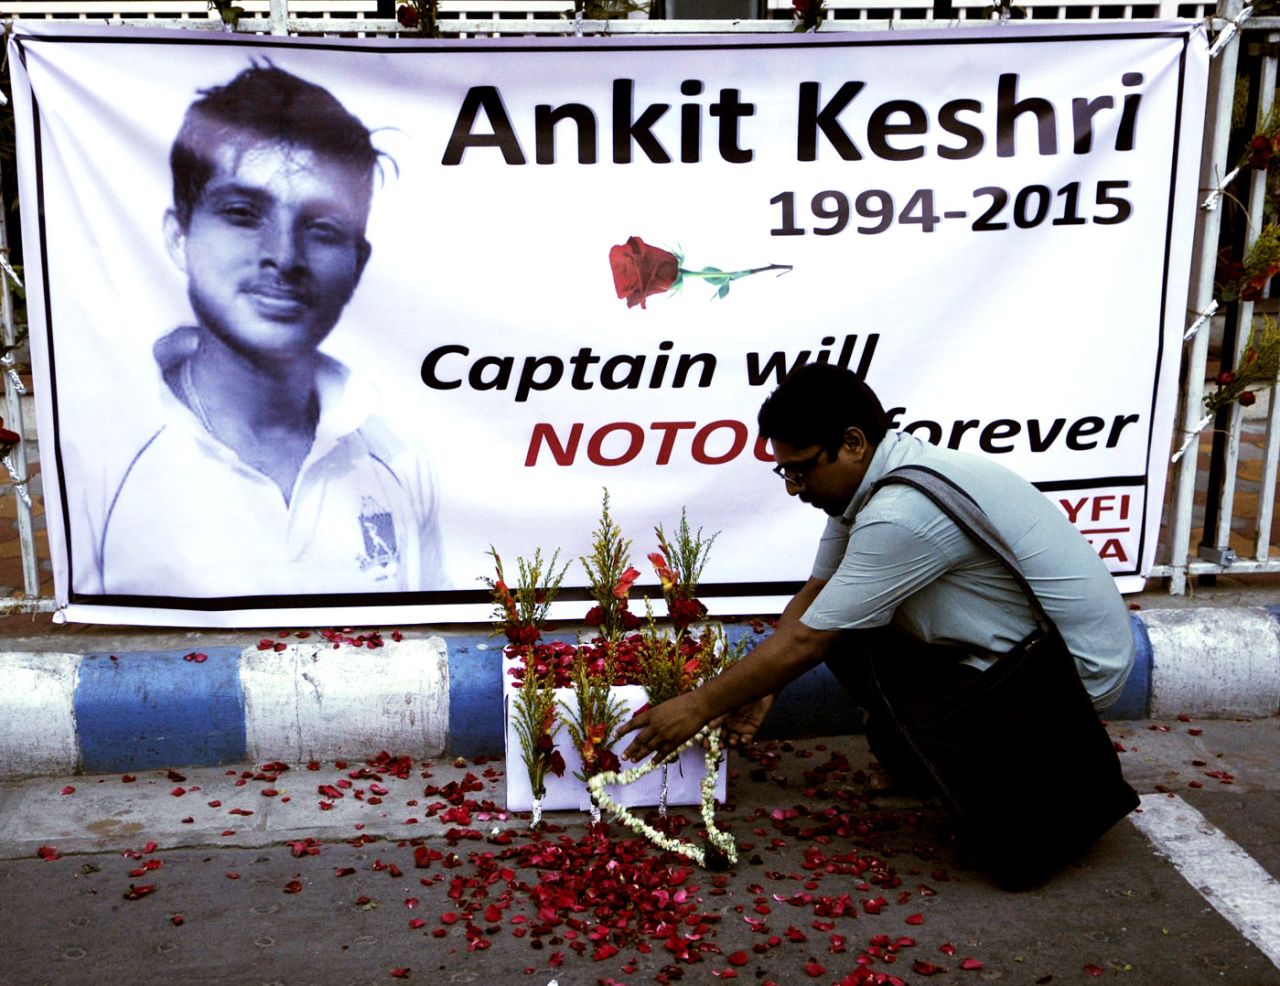 A poster in memory of Ankit Keshri, the Bengal player who died in hospital, Kolkata, April 21, 2015